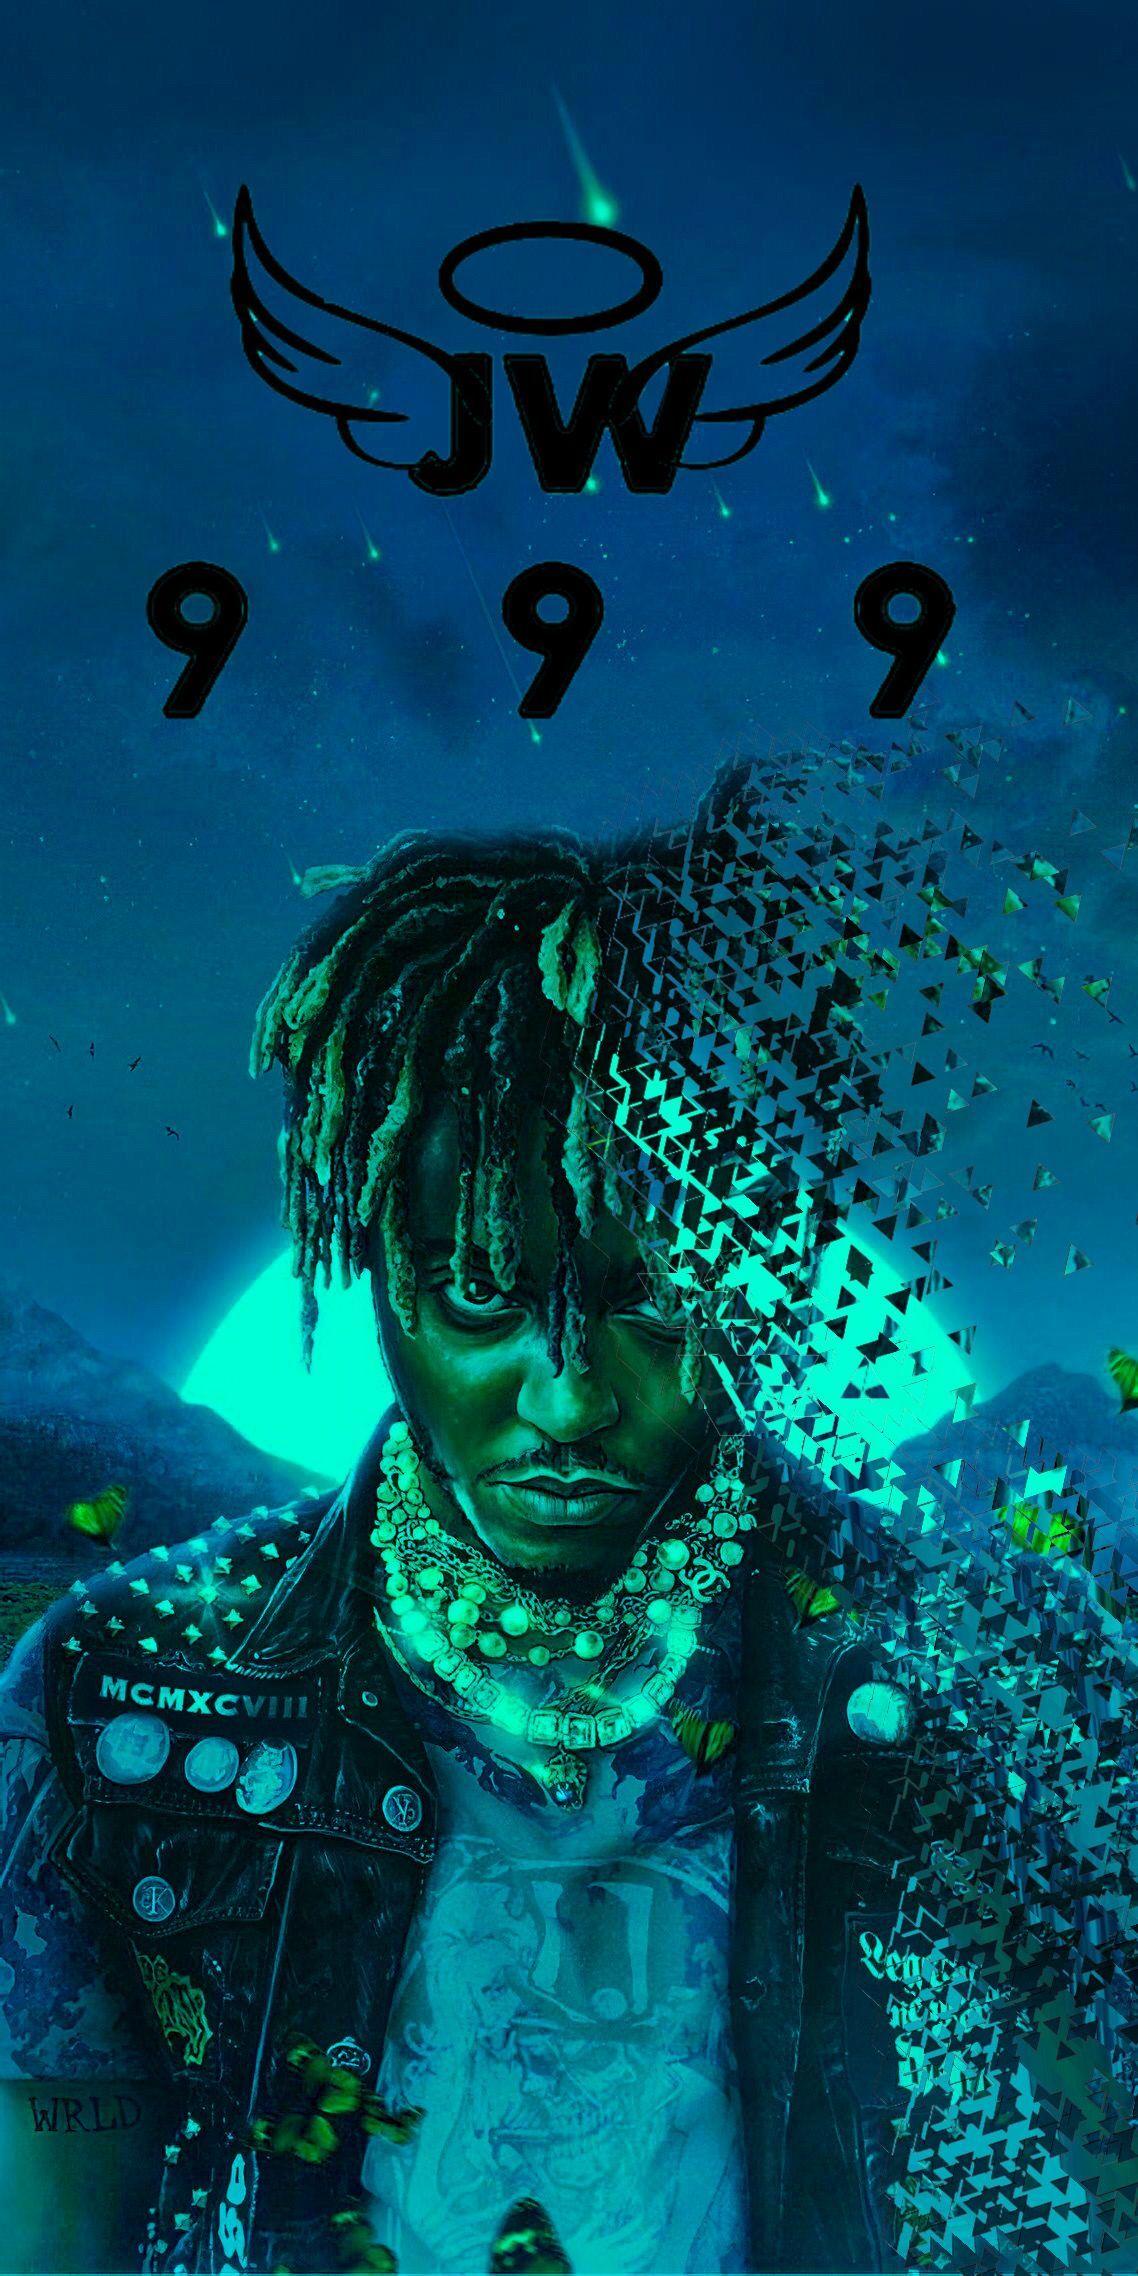 Download Experience the Power of Music with this Stunning Juice Wrld Art  Wallpaper  Wallpaperscom